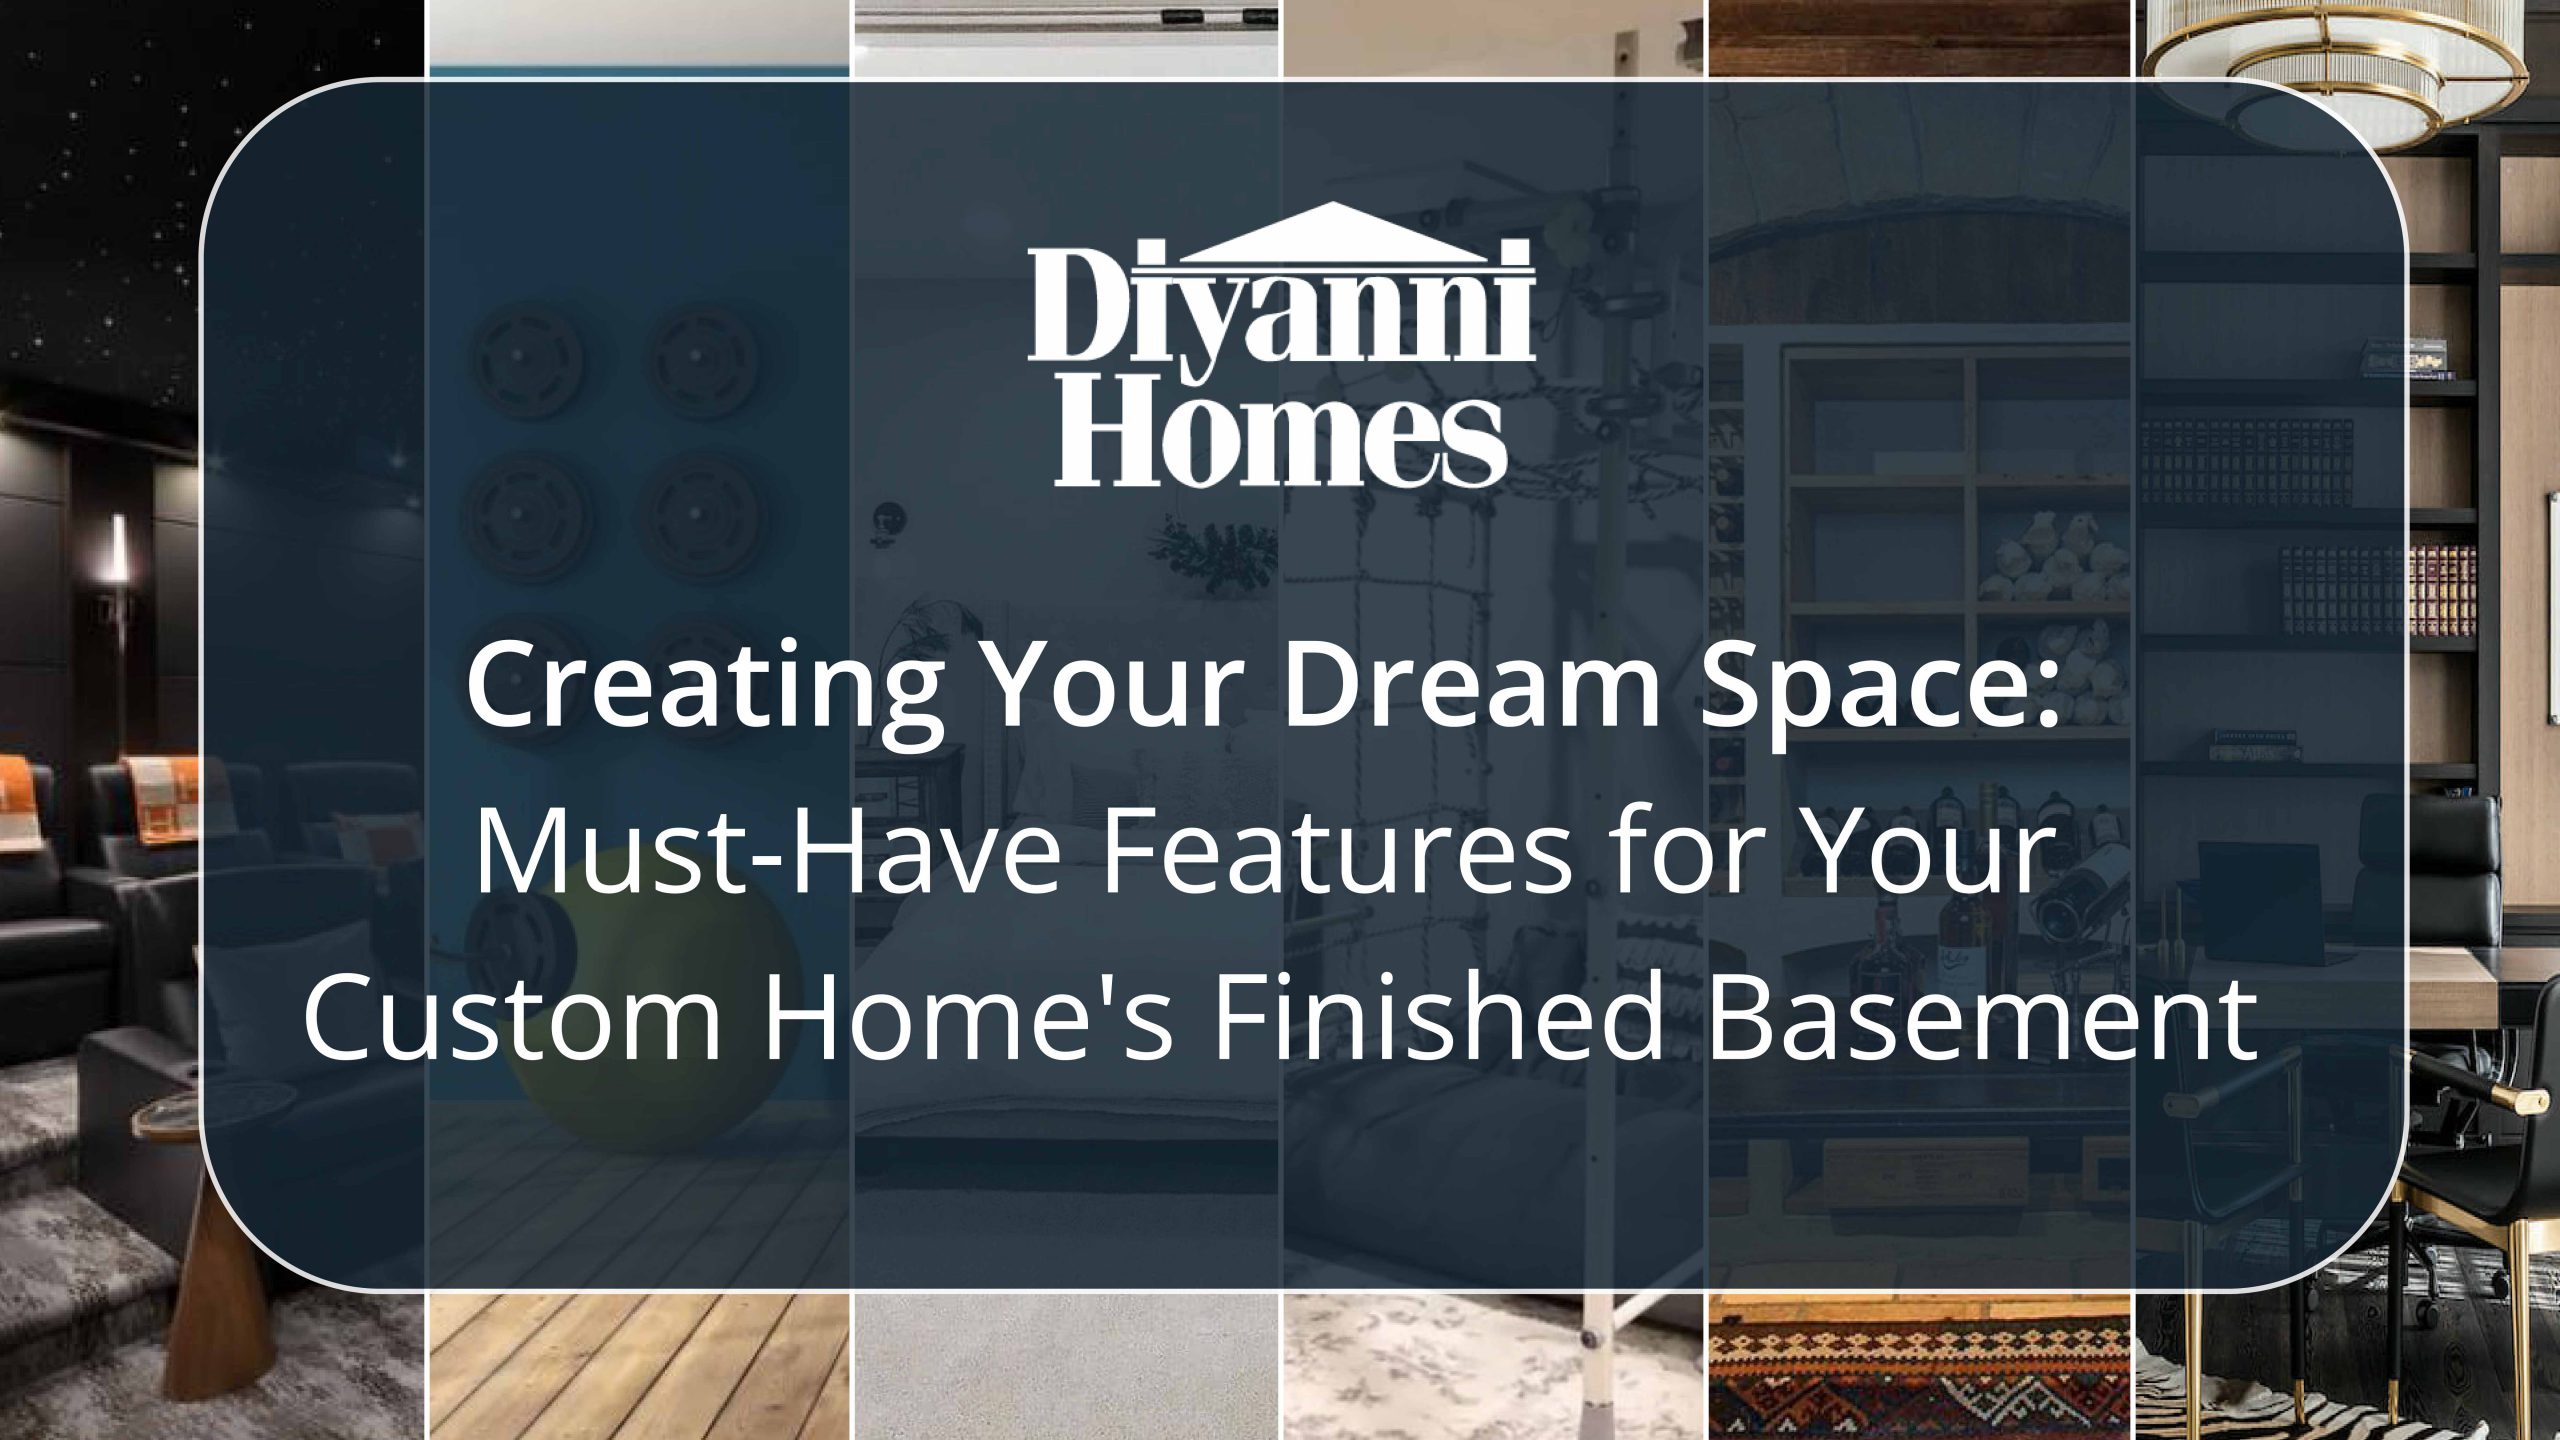 Must-Have Features for Your Custom Home's Finished Basement